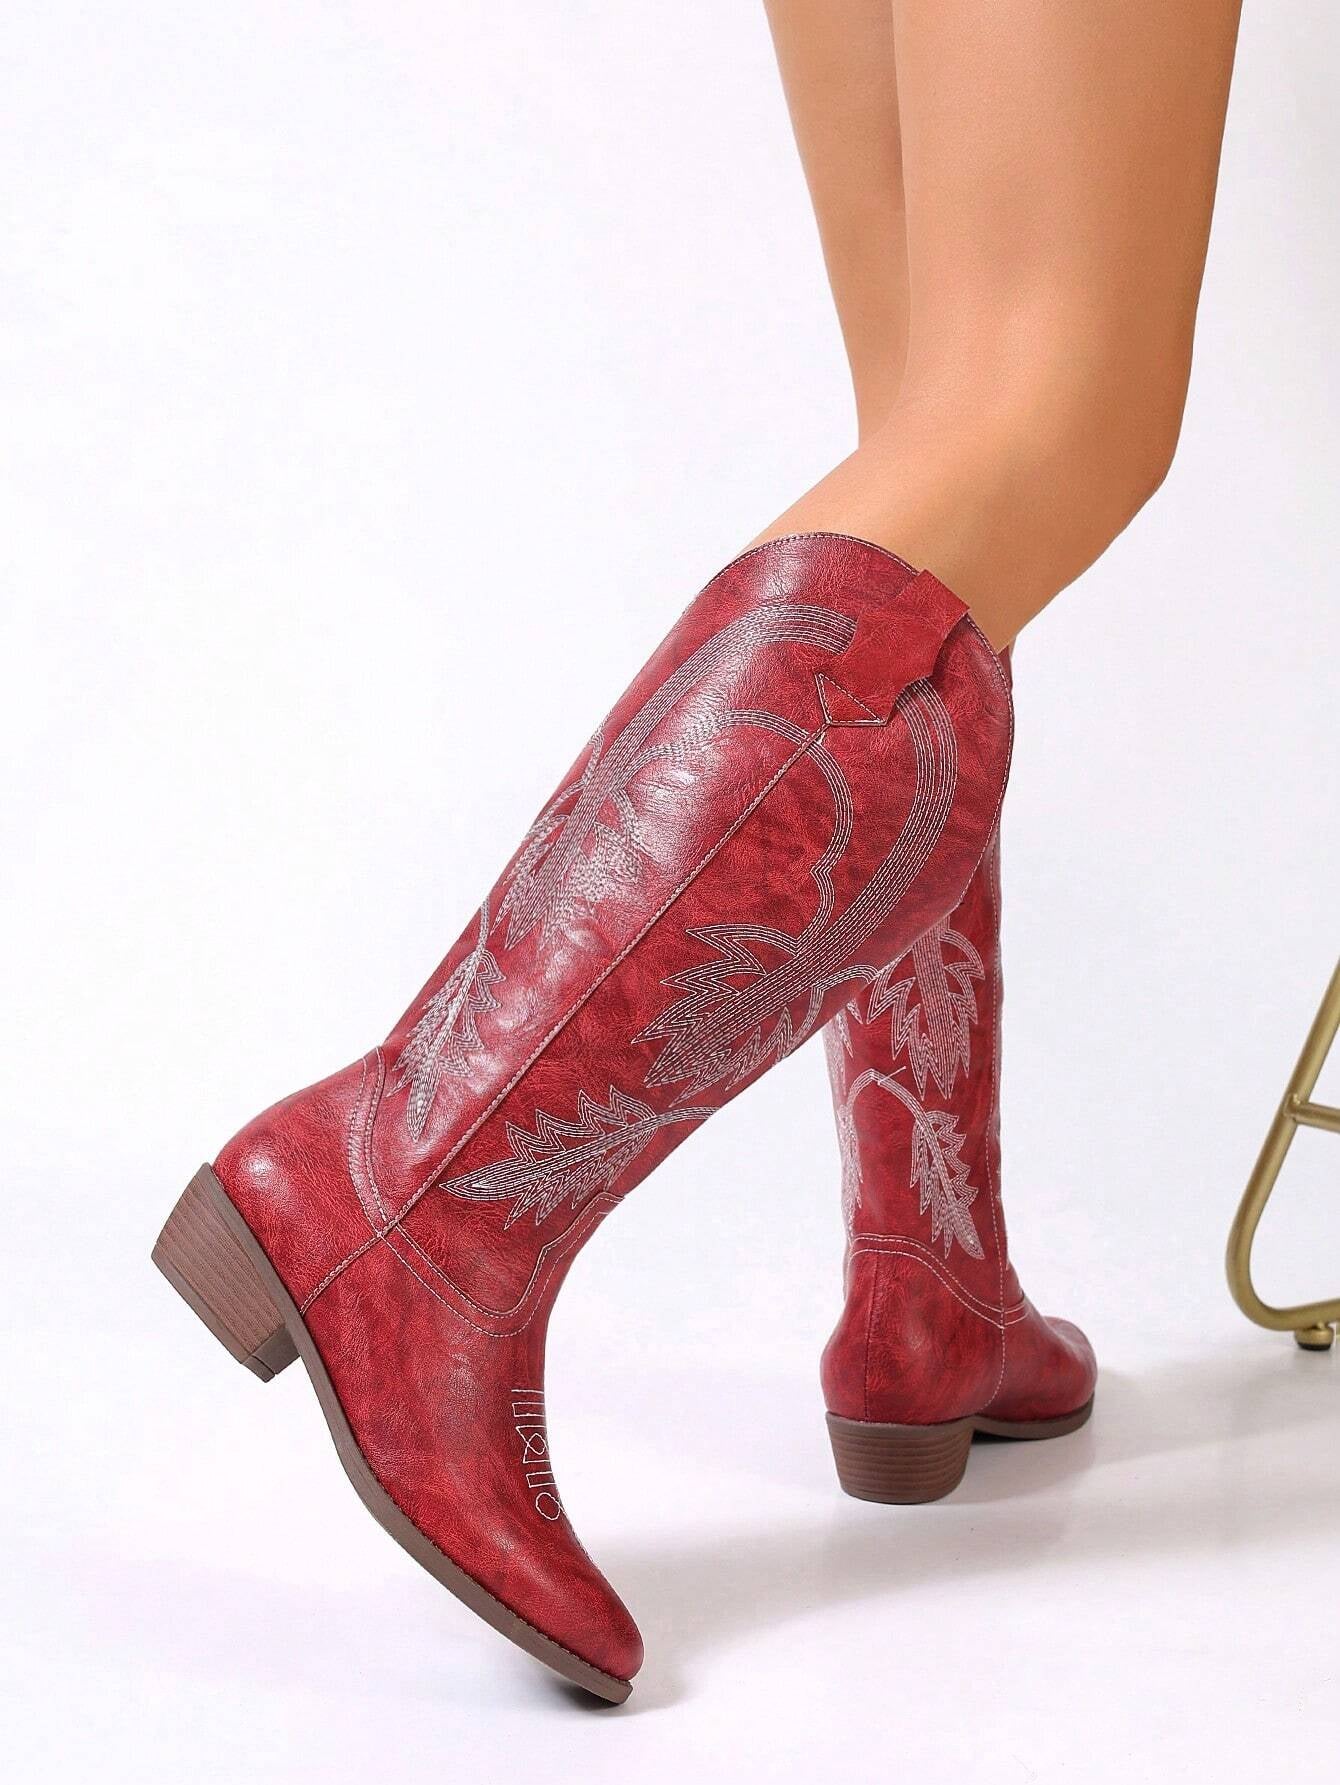 New Style Mid-Calf Women's Boots with Random White Embroidered Flower Pattern and Red Irregular Lines, Chunky Heel, and Round Toe, offering Vers